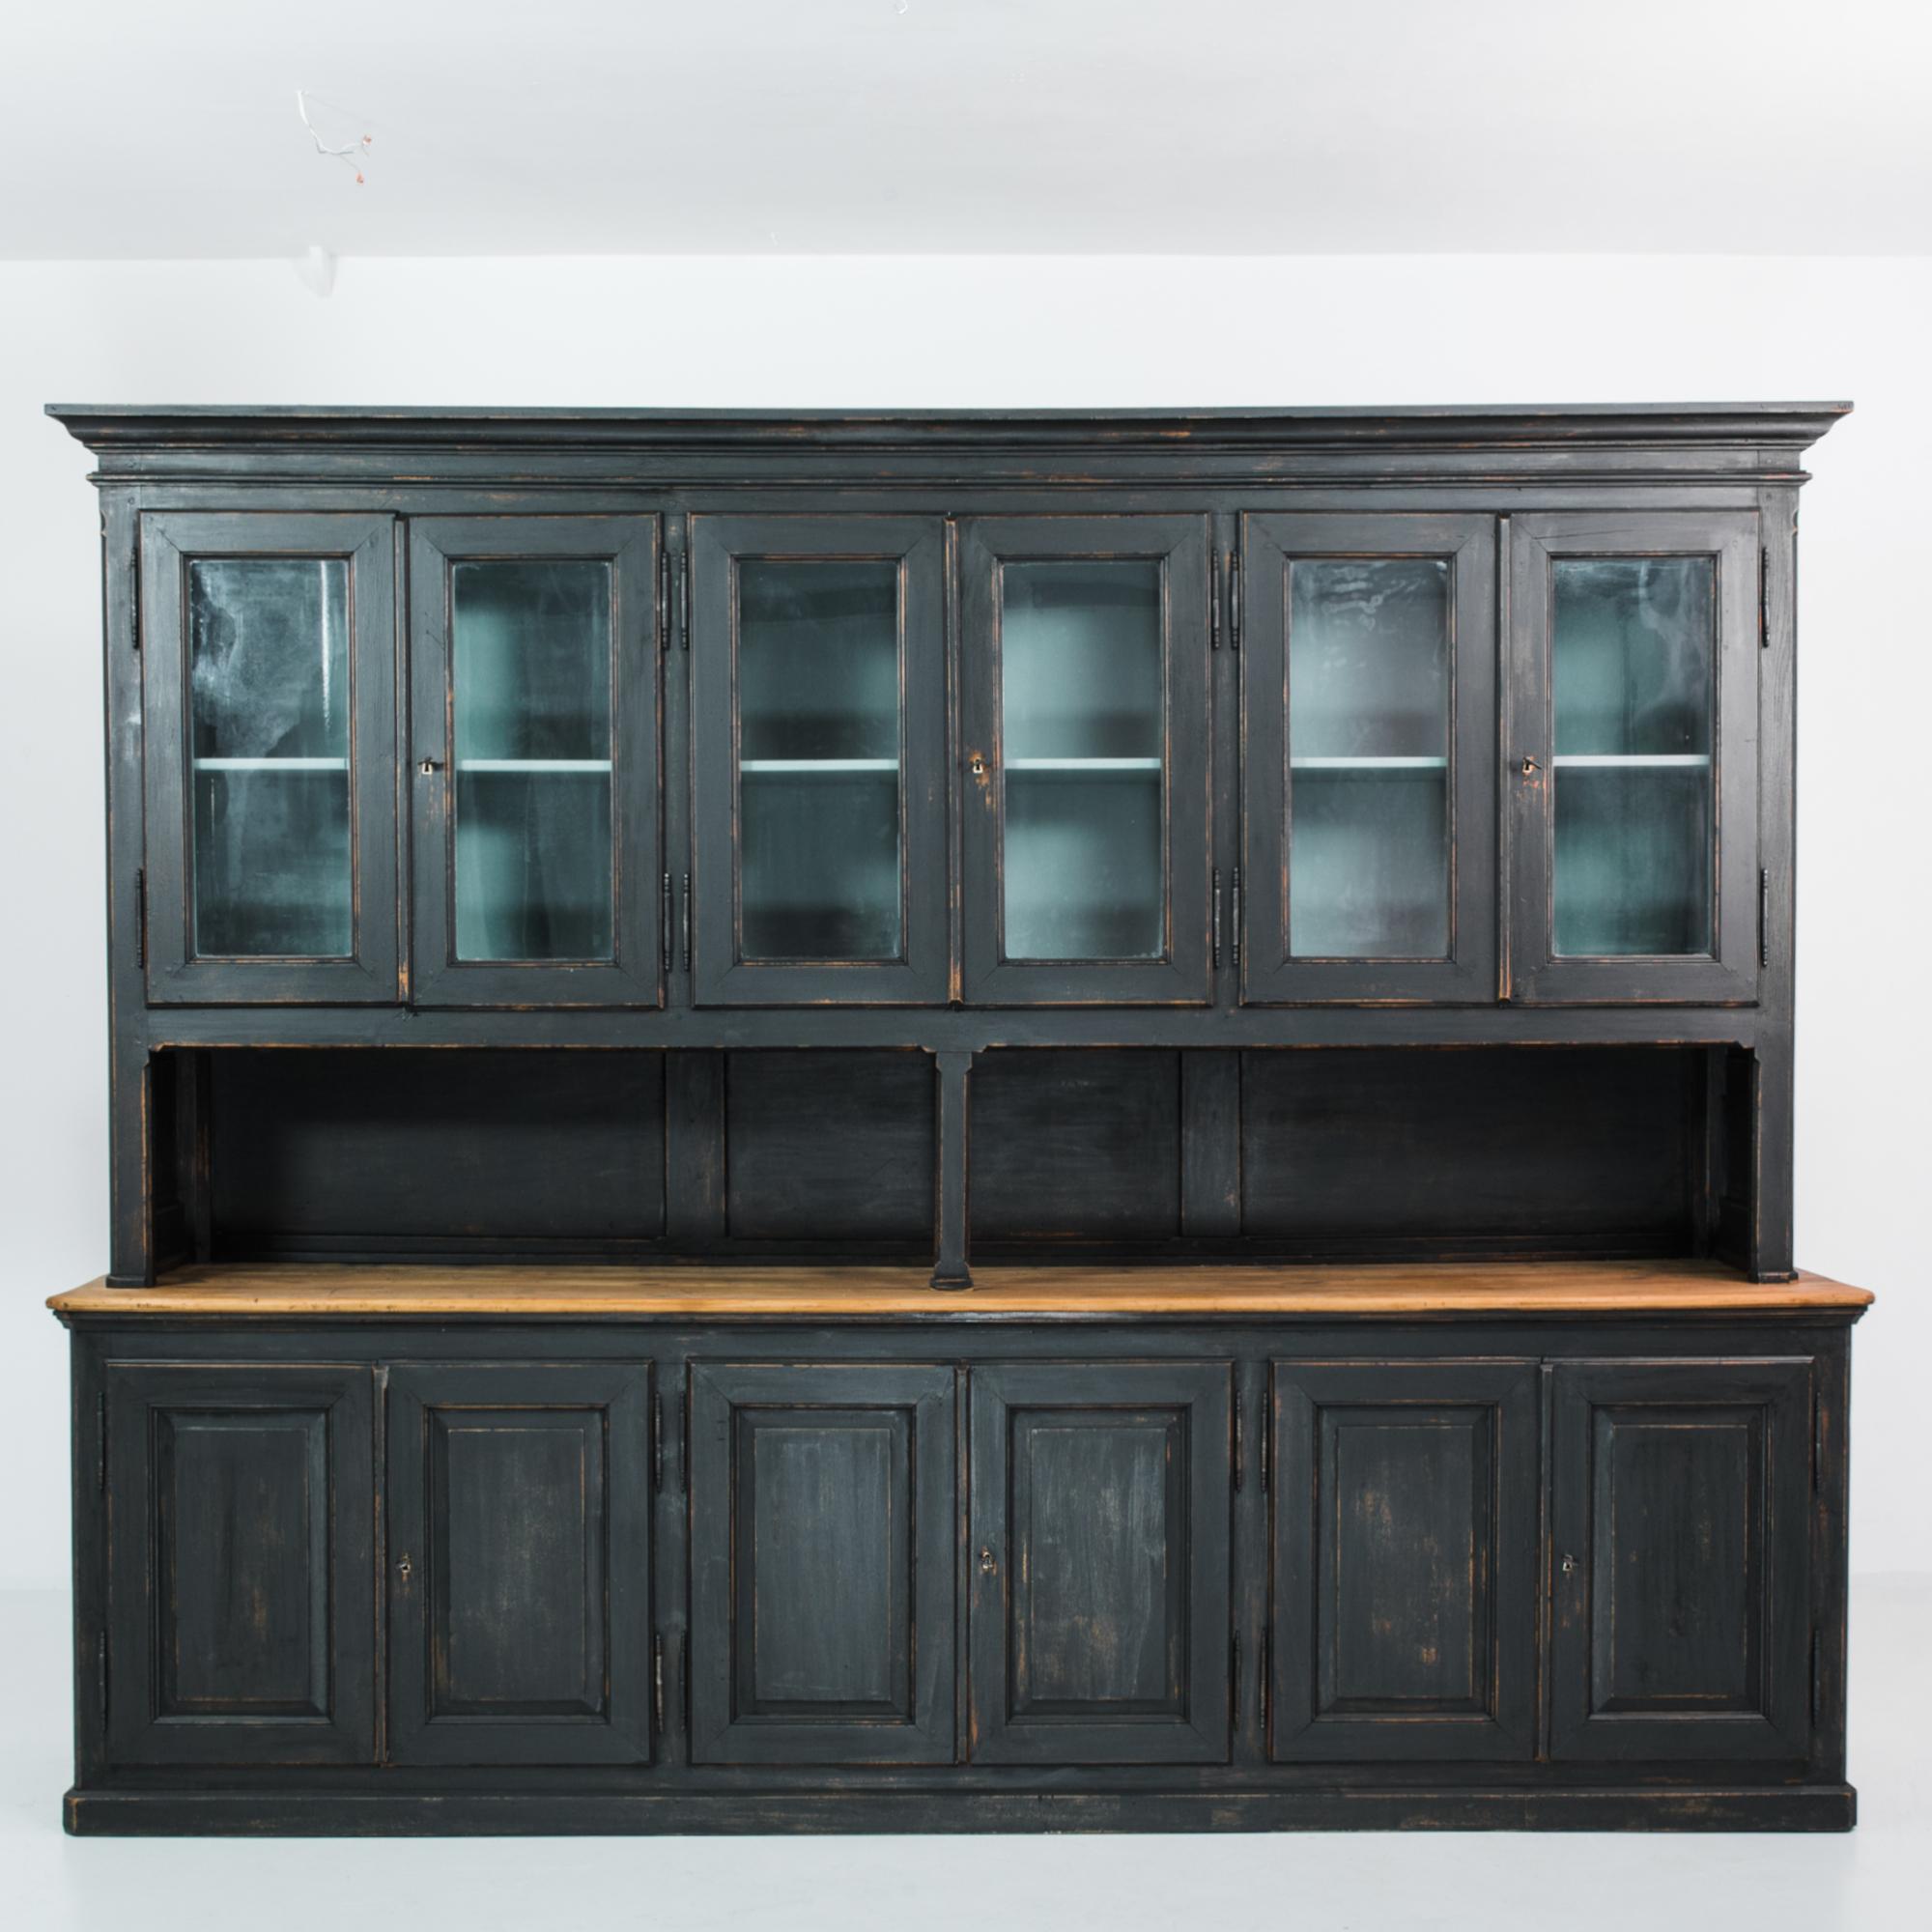 A wood vitrine from France, produced circa 1900. A grand, black patinated wooden buffet cabinet, featuring three glass front, double door upper cabinets, a matching trio of lower wood door double cabinets, and a central shelf. From the blue interior